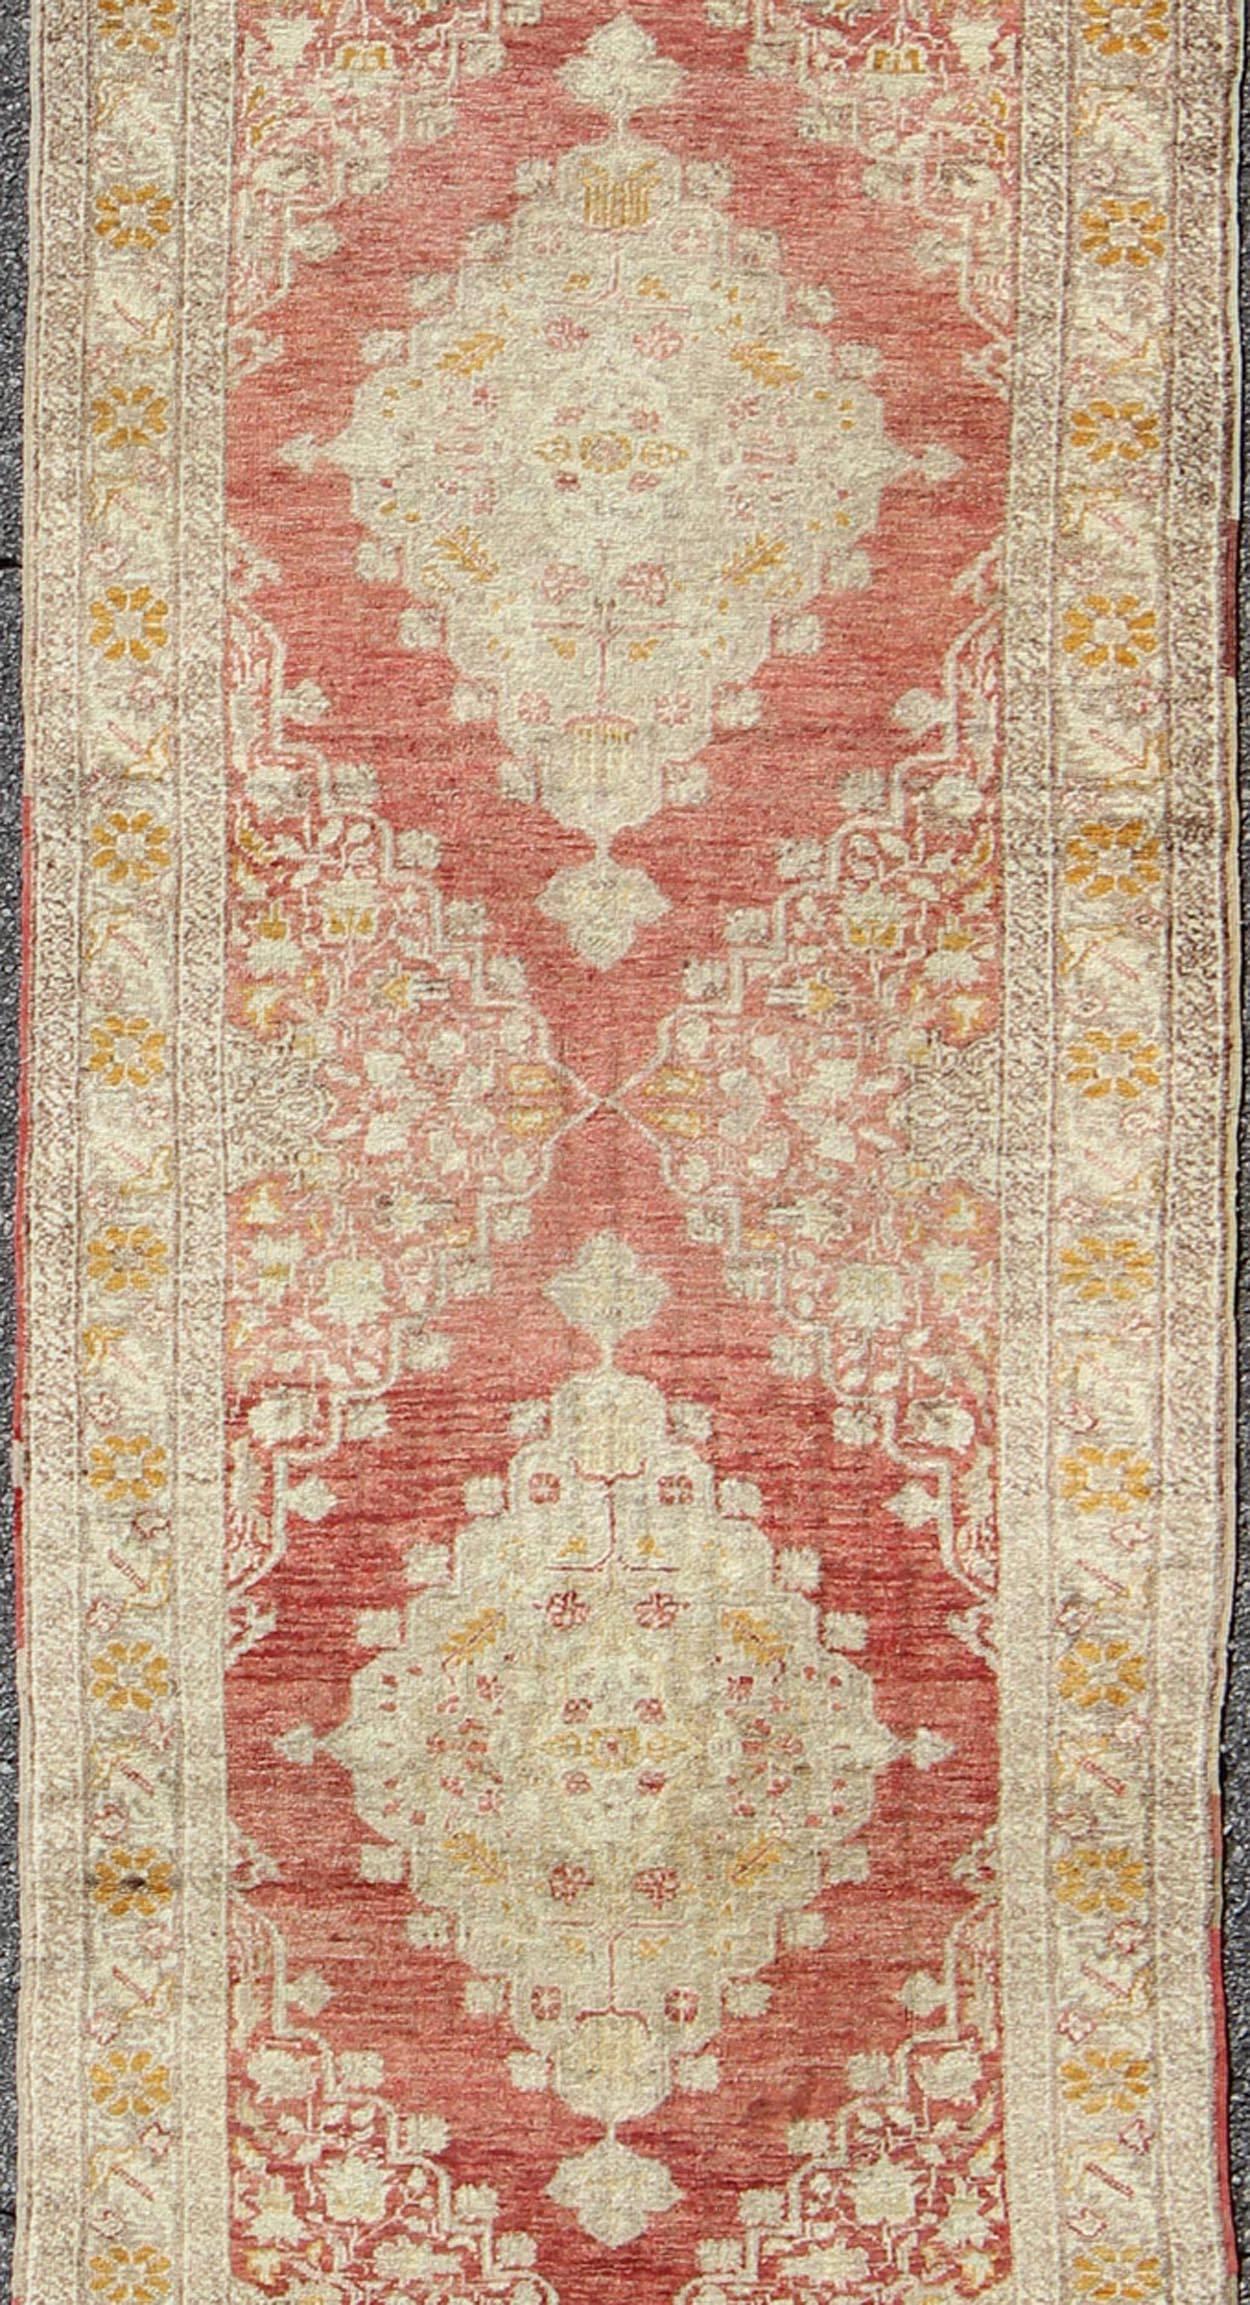 Antique Turkish Oushak Runner with Red Background and Ivory/Cream Medallions In Excellent Condition For Sale In Atlanta, GA